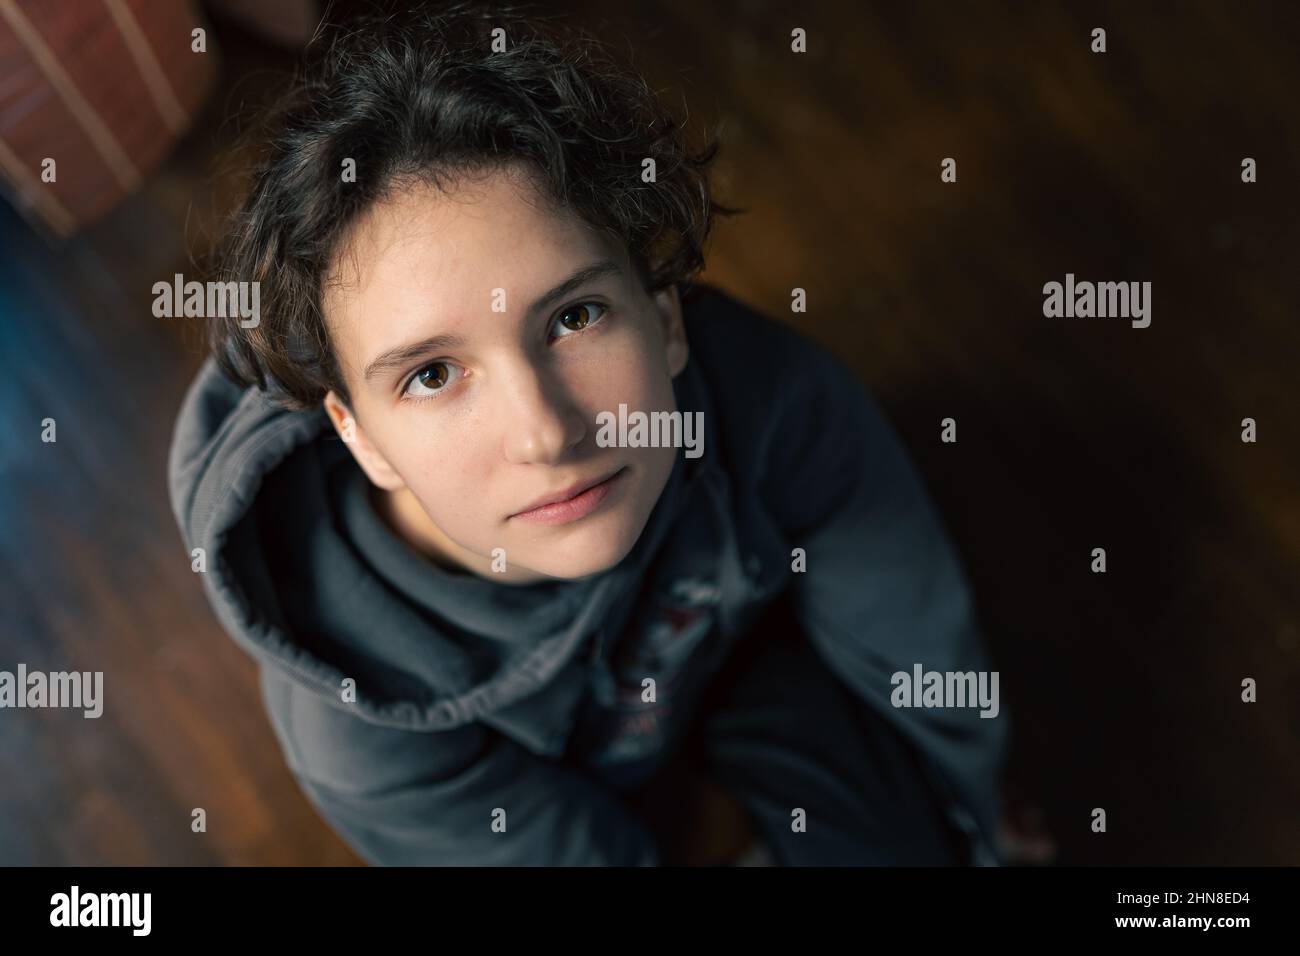 Portrait of teen girl with brown eyes looking at camera, brown curly hair sitting on floor. Looking up Stock Photo